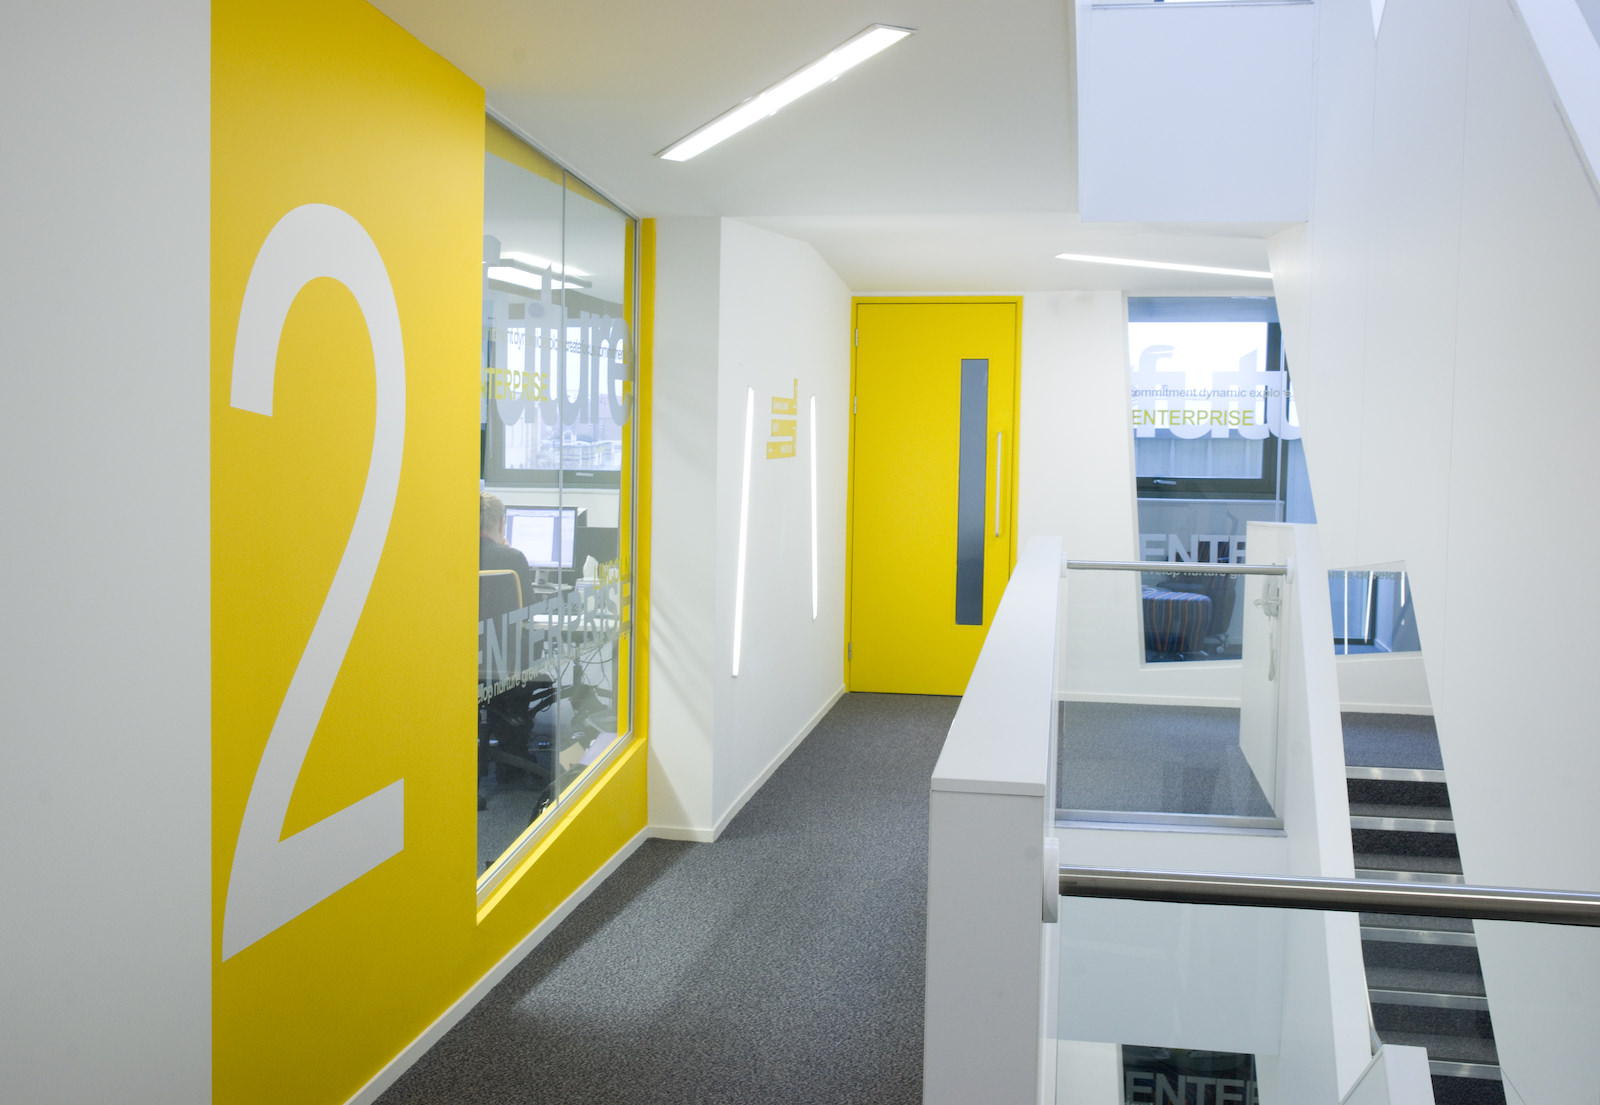 yellow and white minimal architecture design of the enterprise building